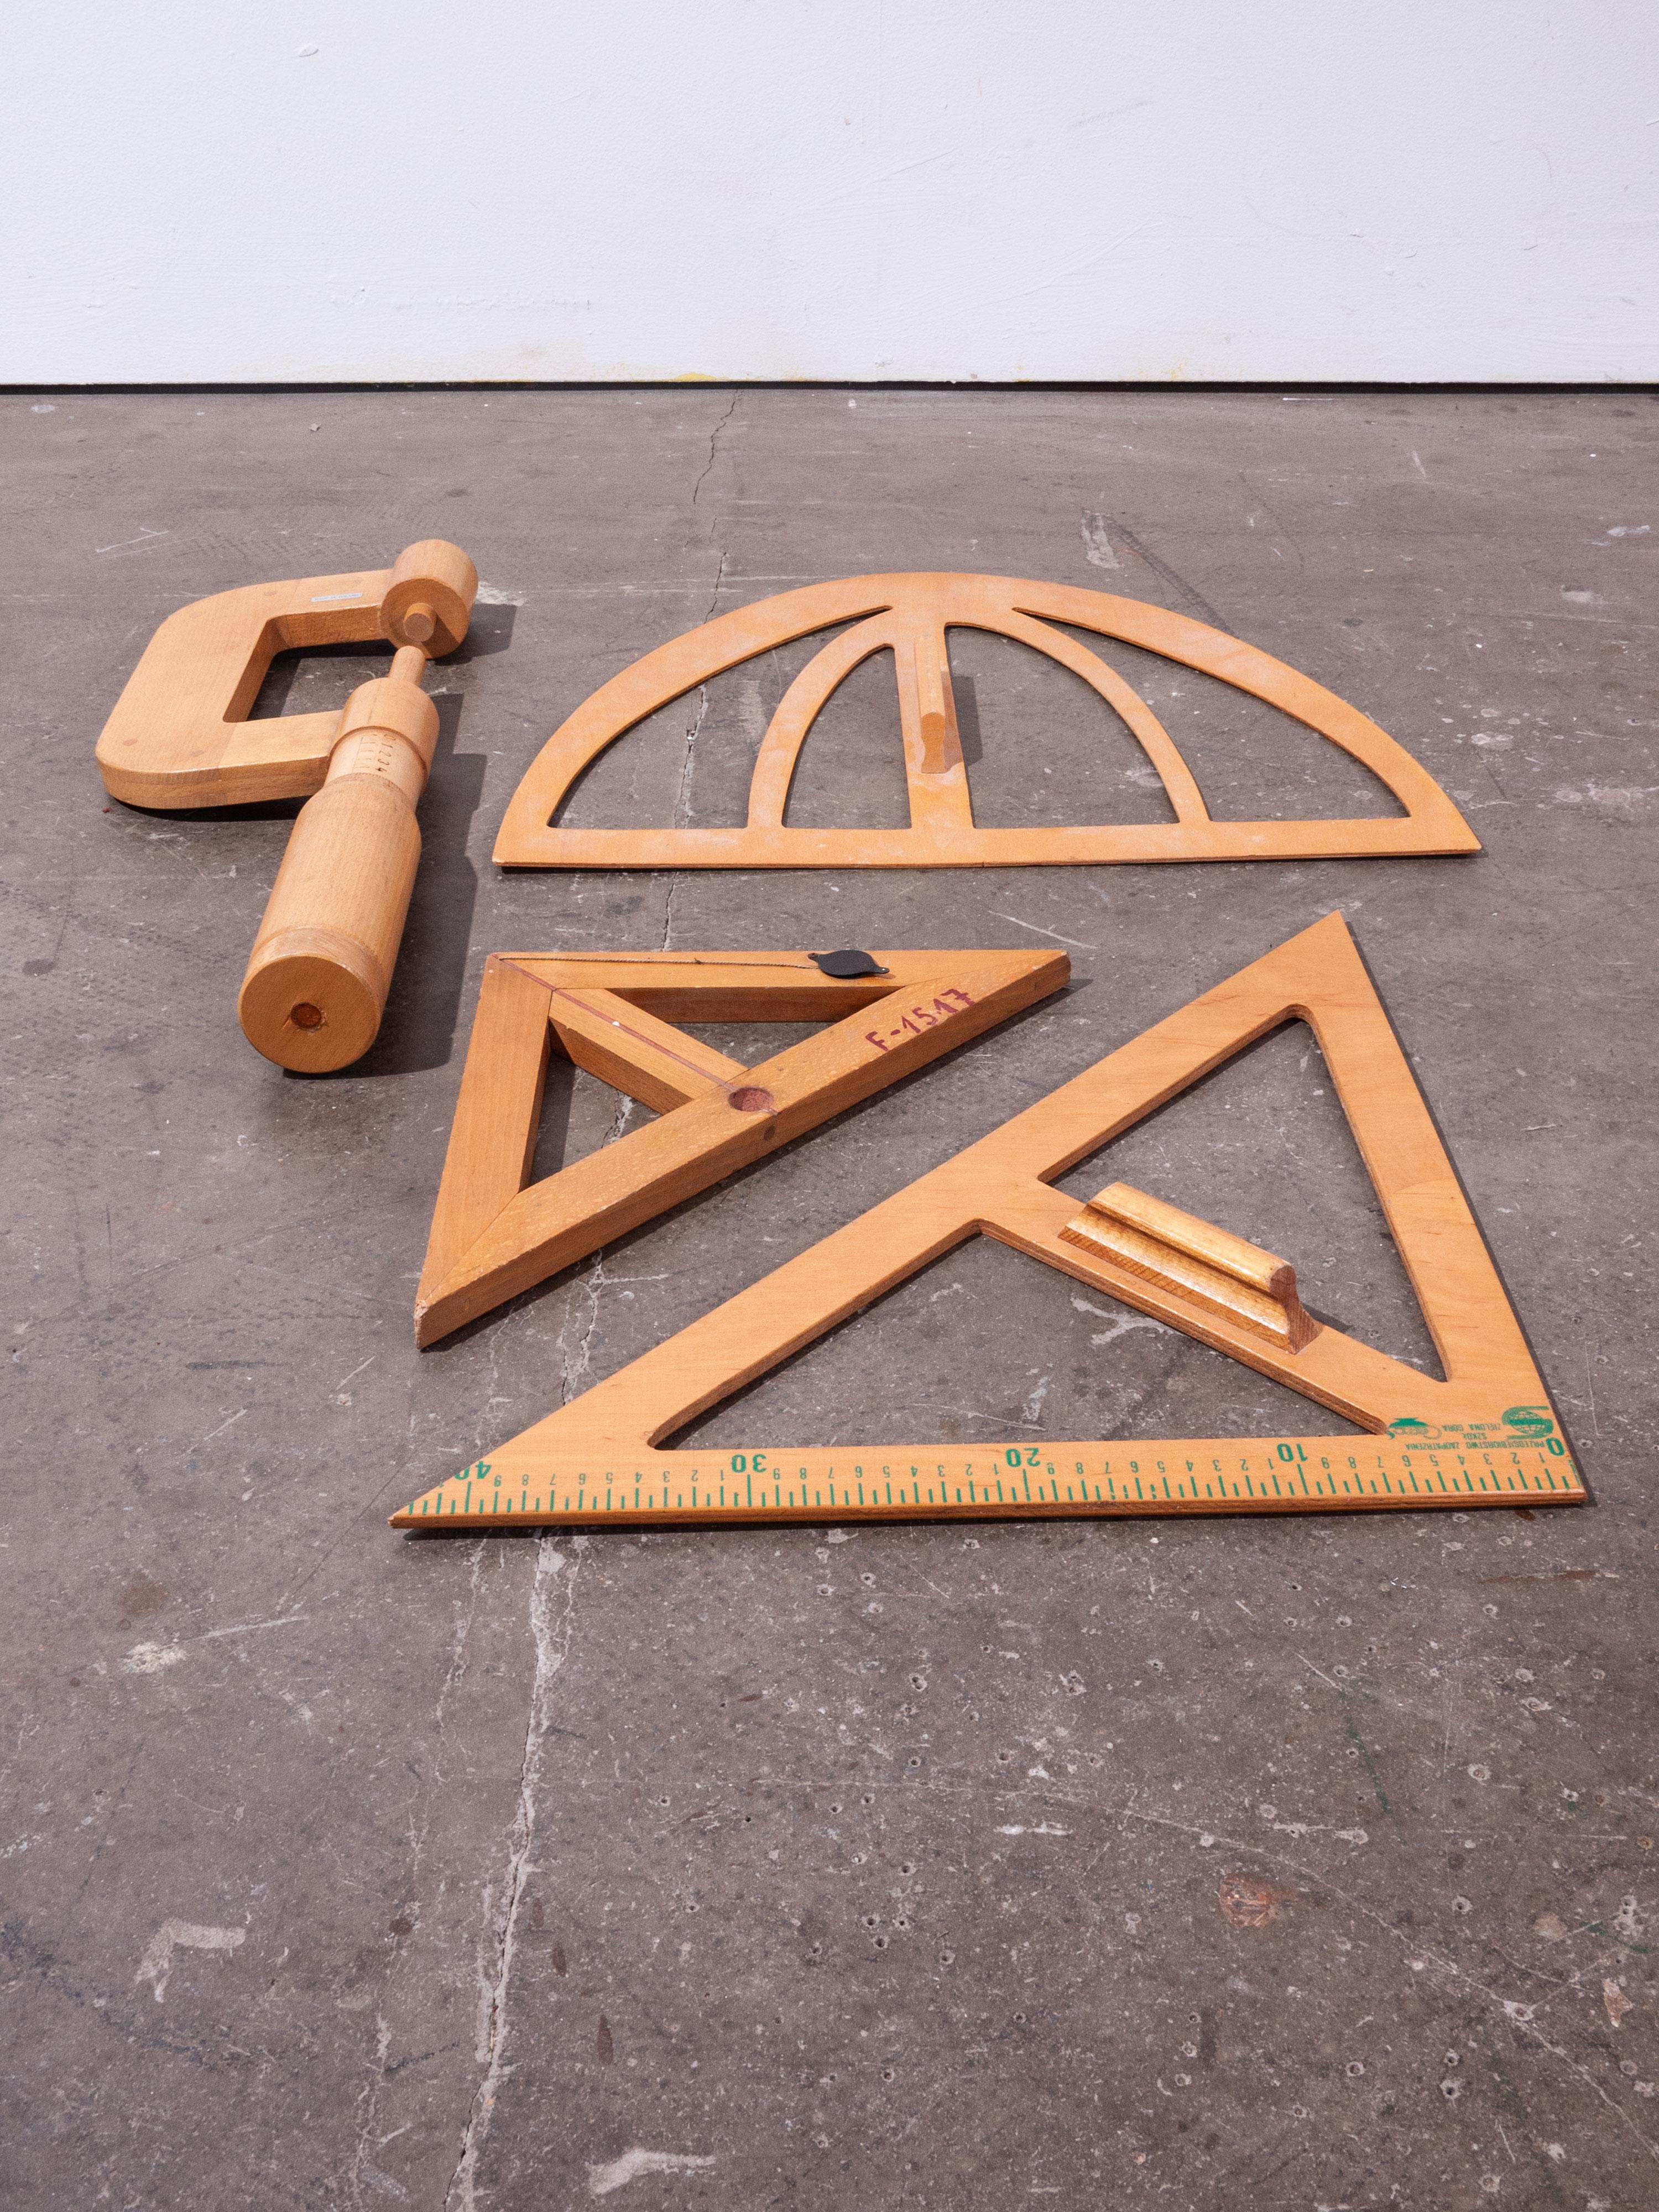 1950s extra large wooden measures set, four pieces

1950s extra large wooden measures set. Featuring an oversize Vernier calliper set and three blackboard geometric drawing shapes. Oversize callipers measure 56 cm in length and are fully